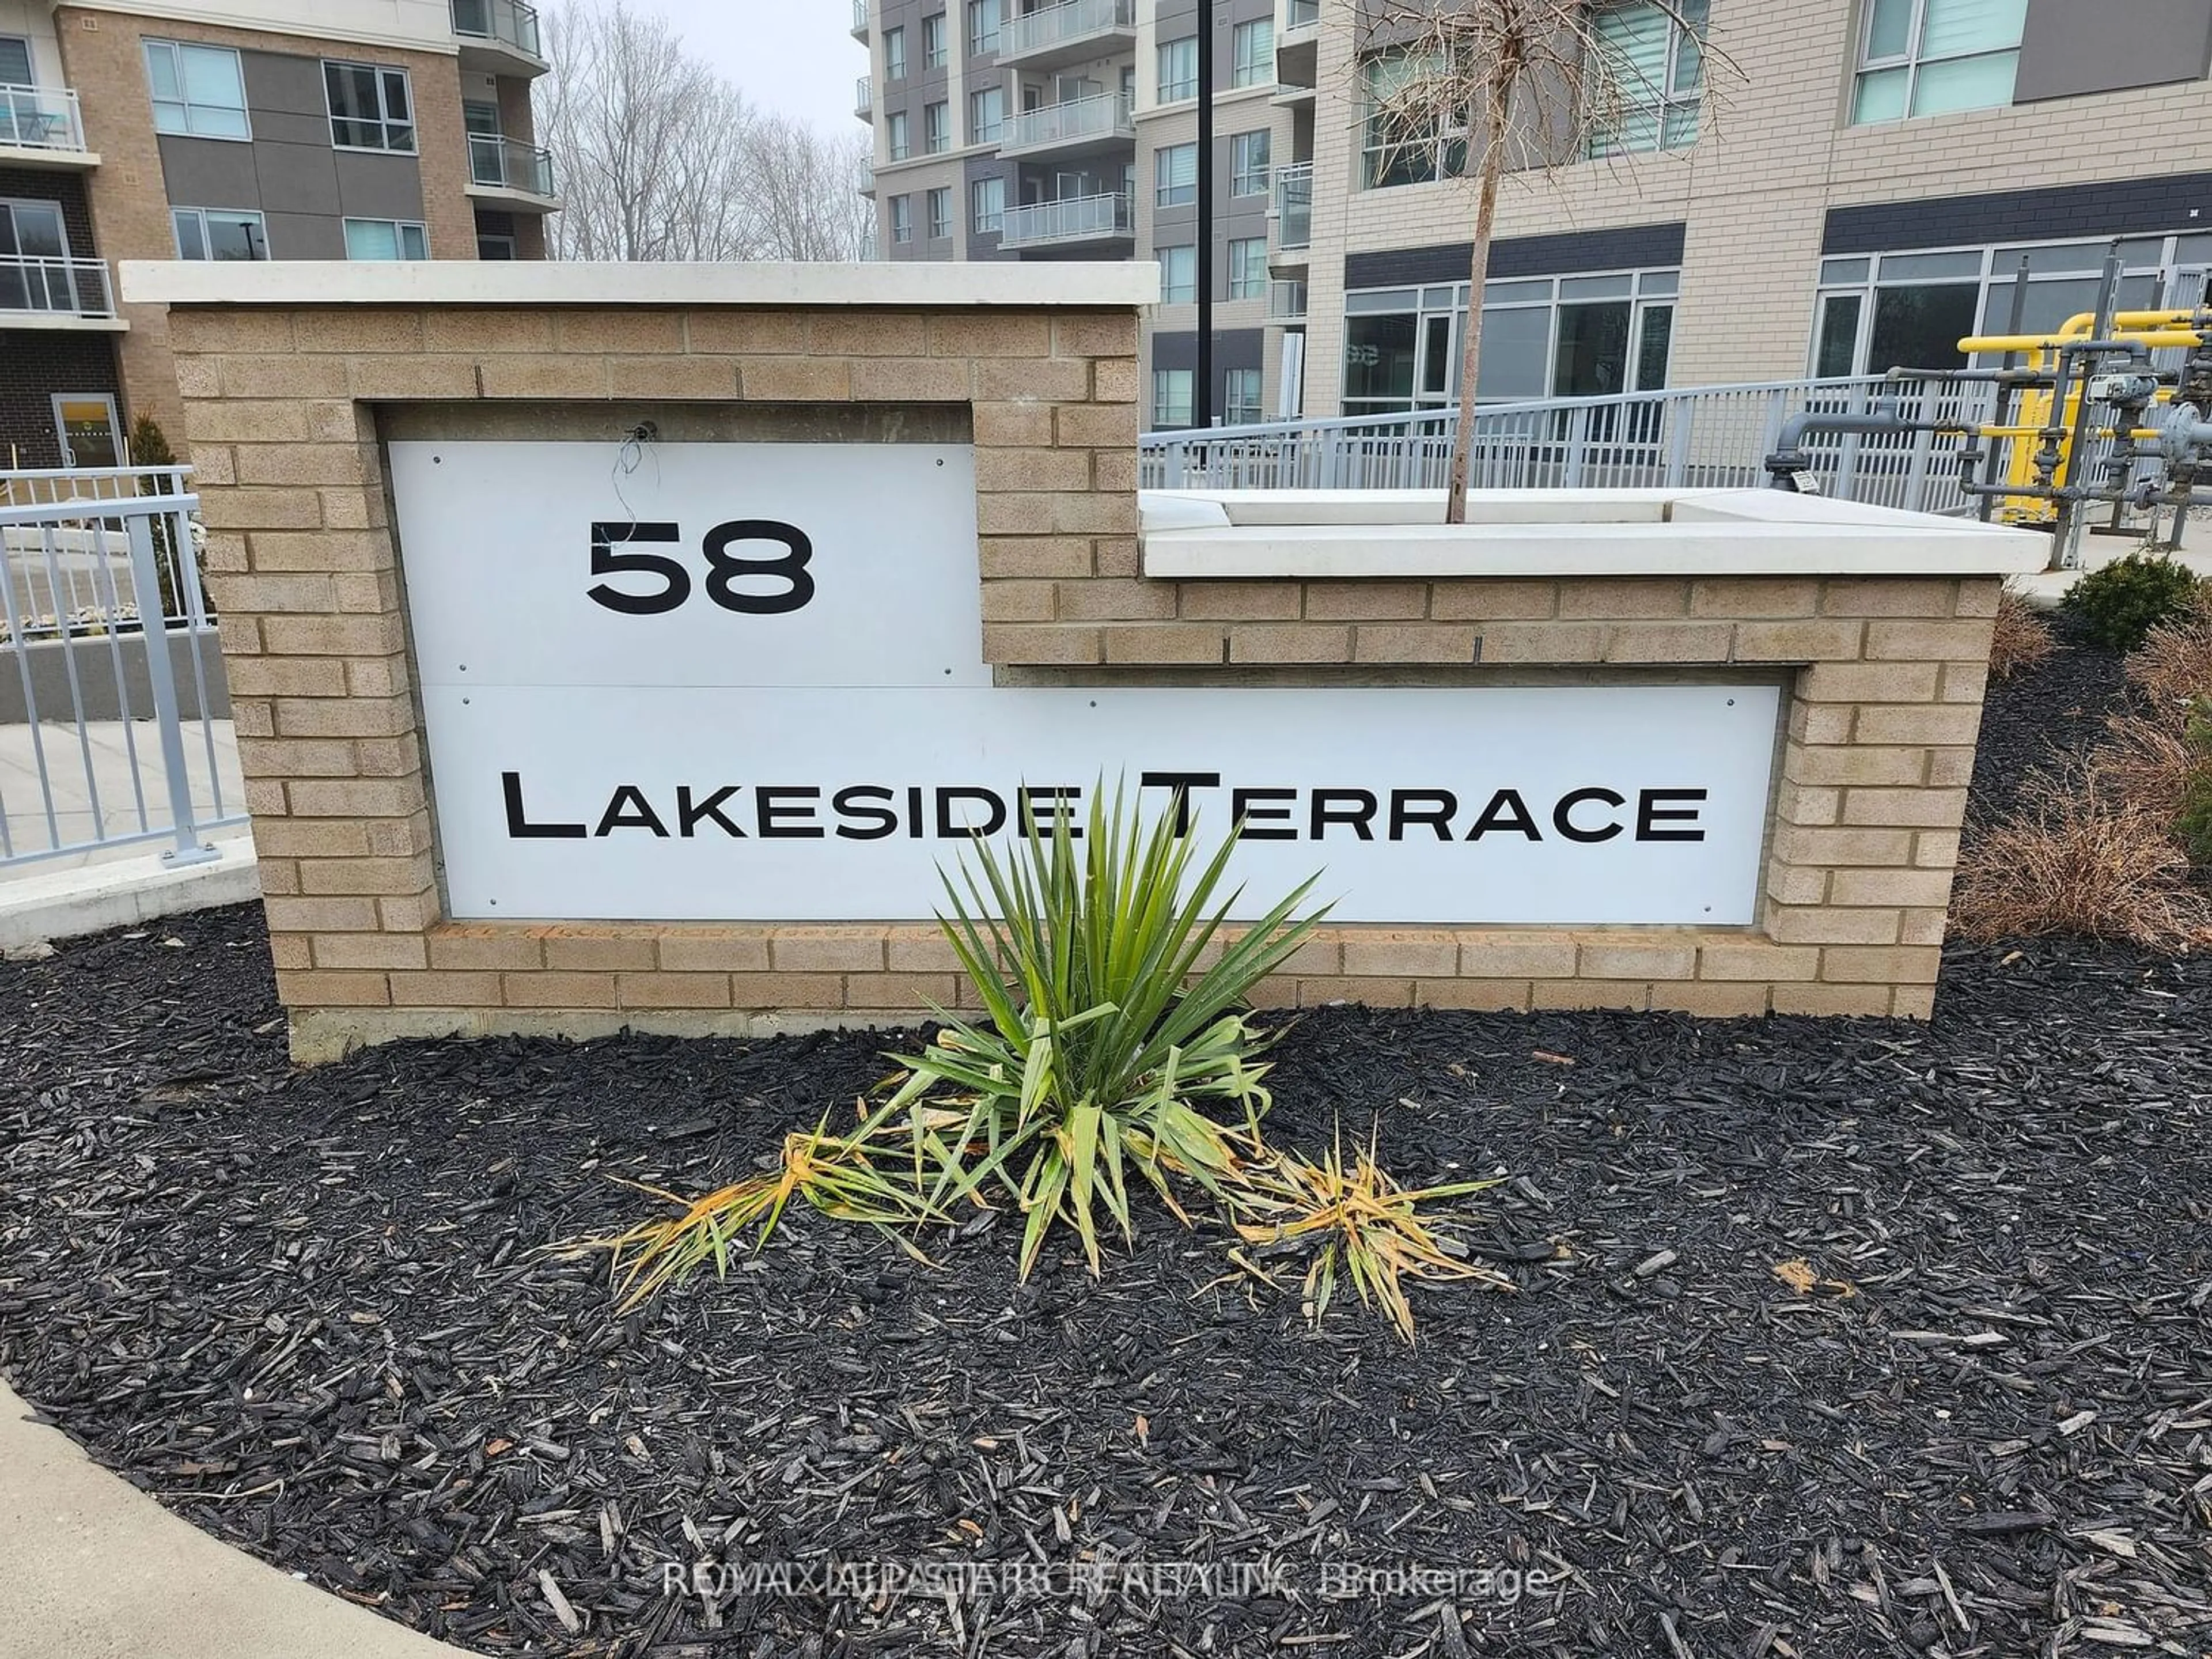 Lakeview for 58 Lakeside Terr #601, Barrie Ontario L4M 0H9